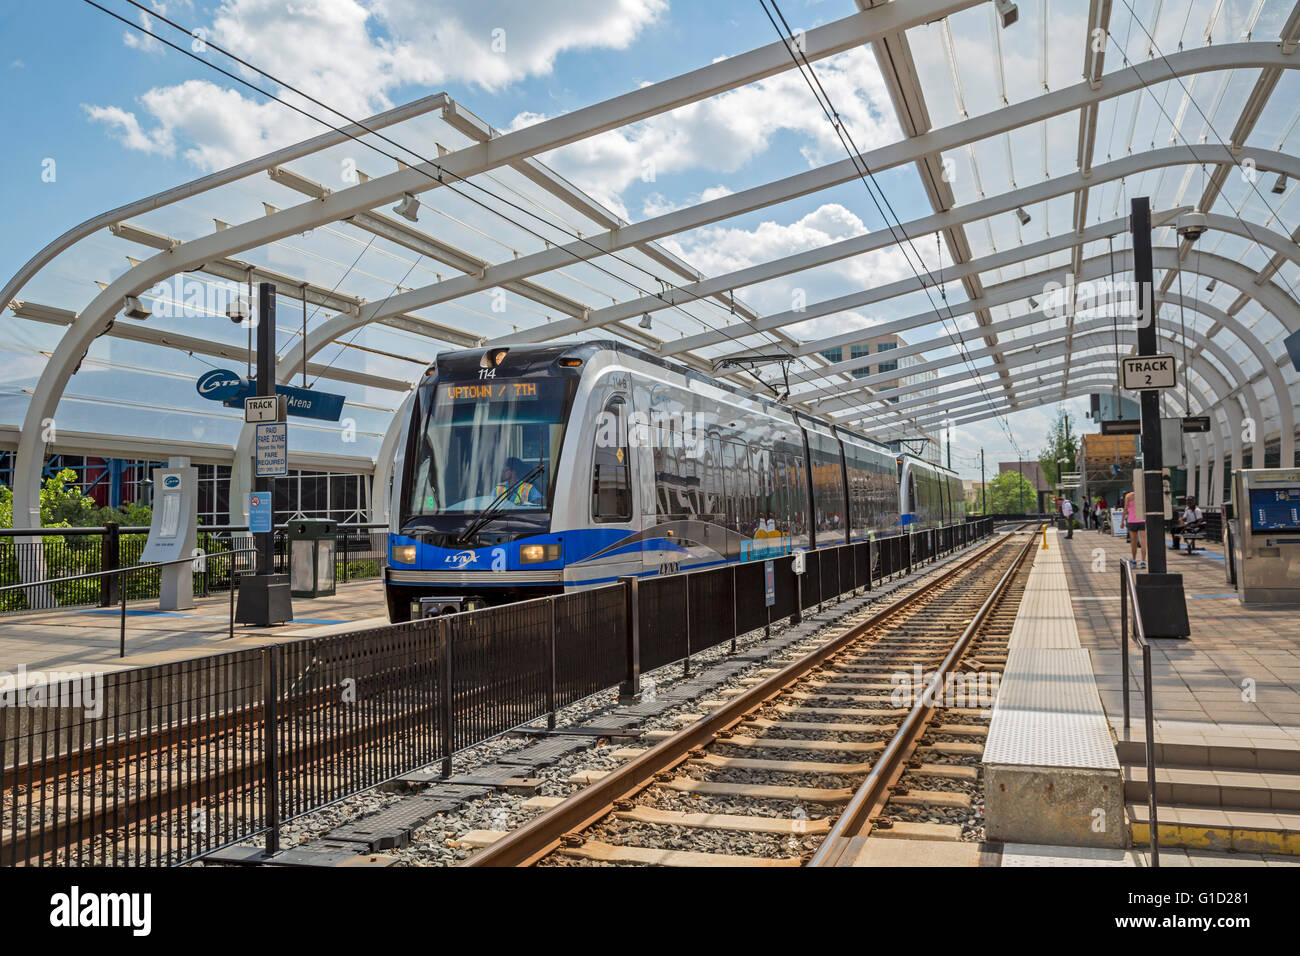 Charlotte, North Carolina - A train at an uptown station of LYNX Charlotte, the city's light rail system. Stock Photo